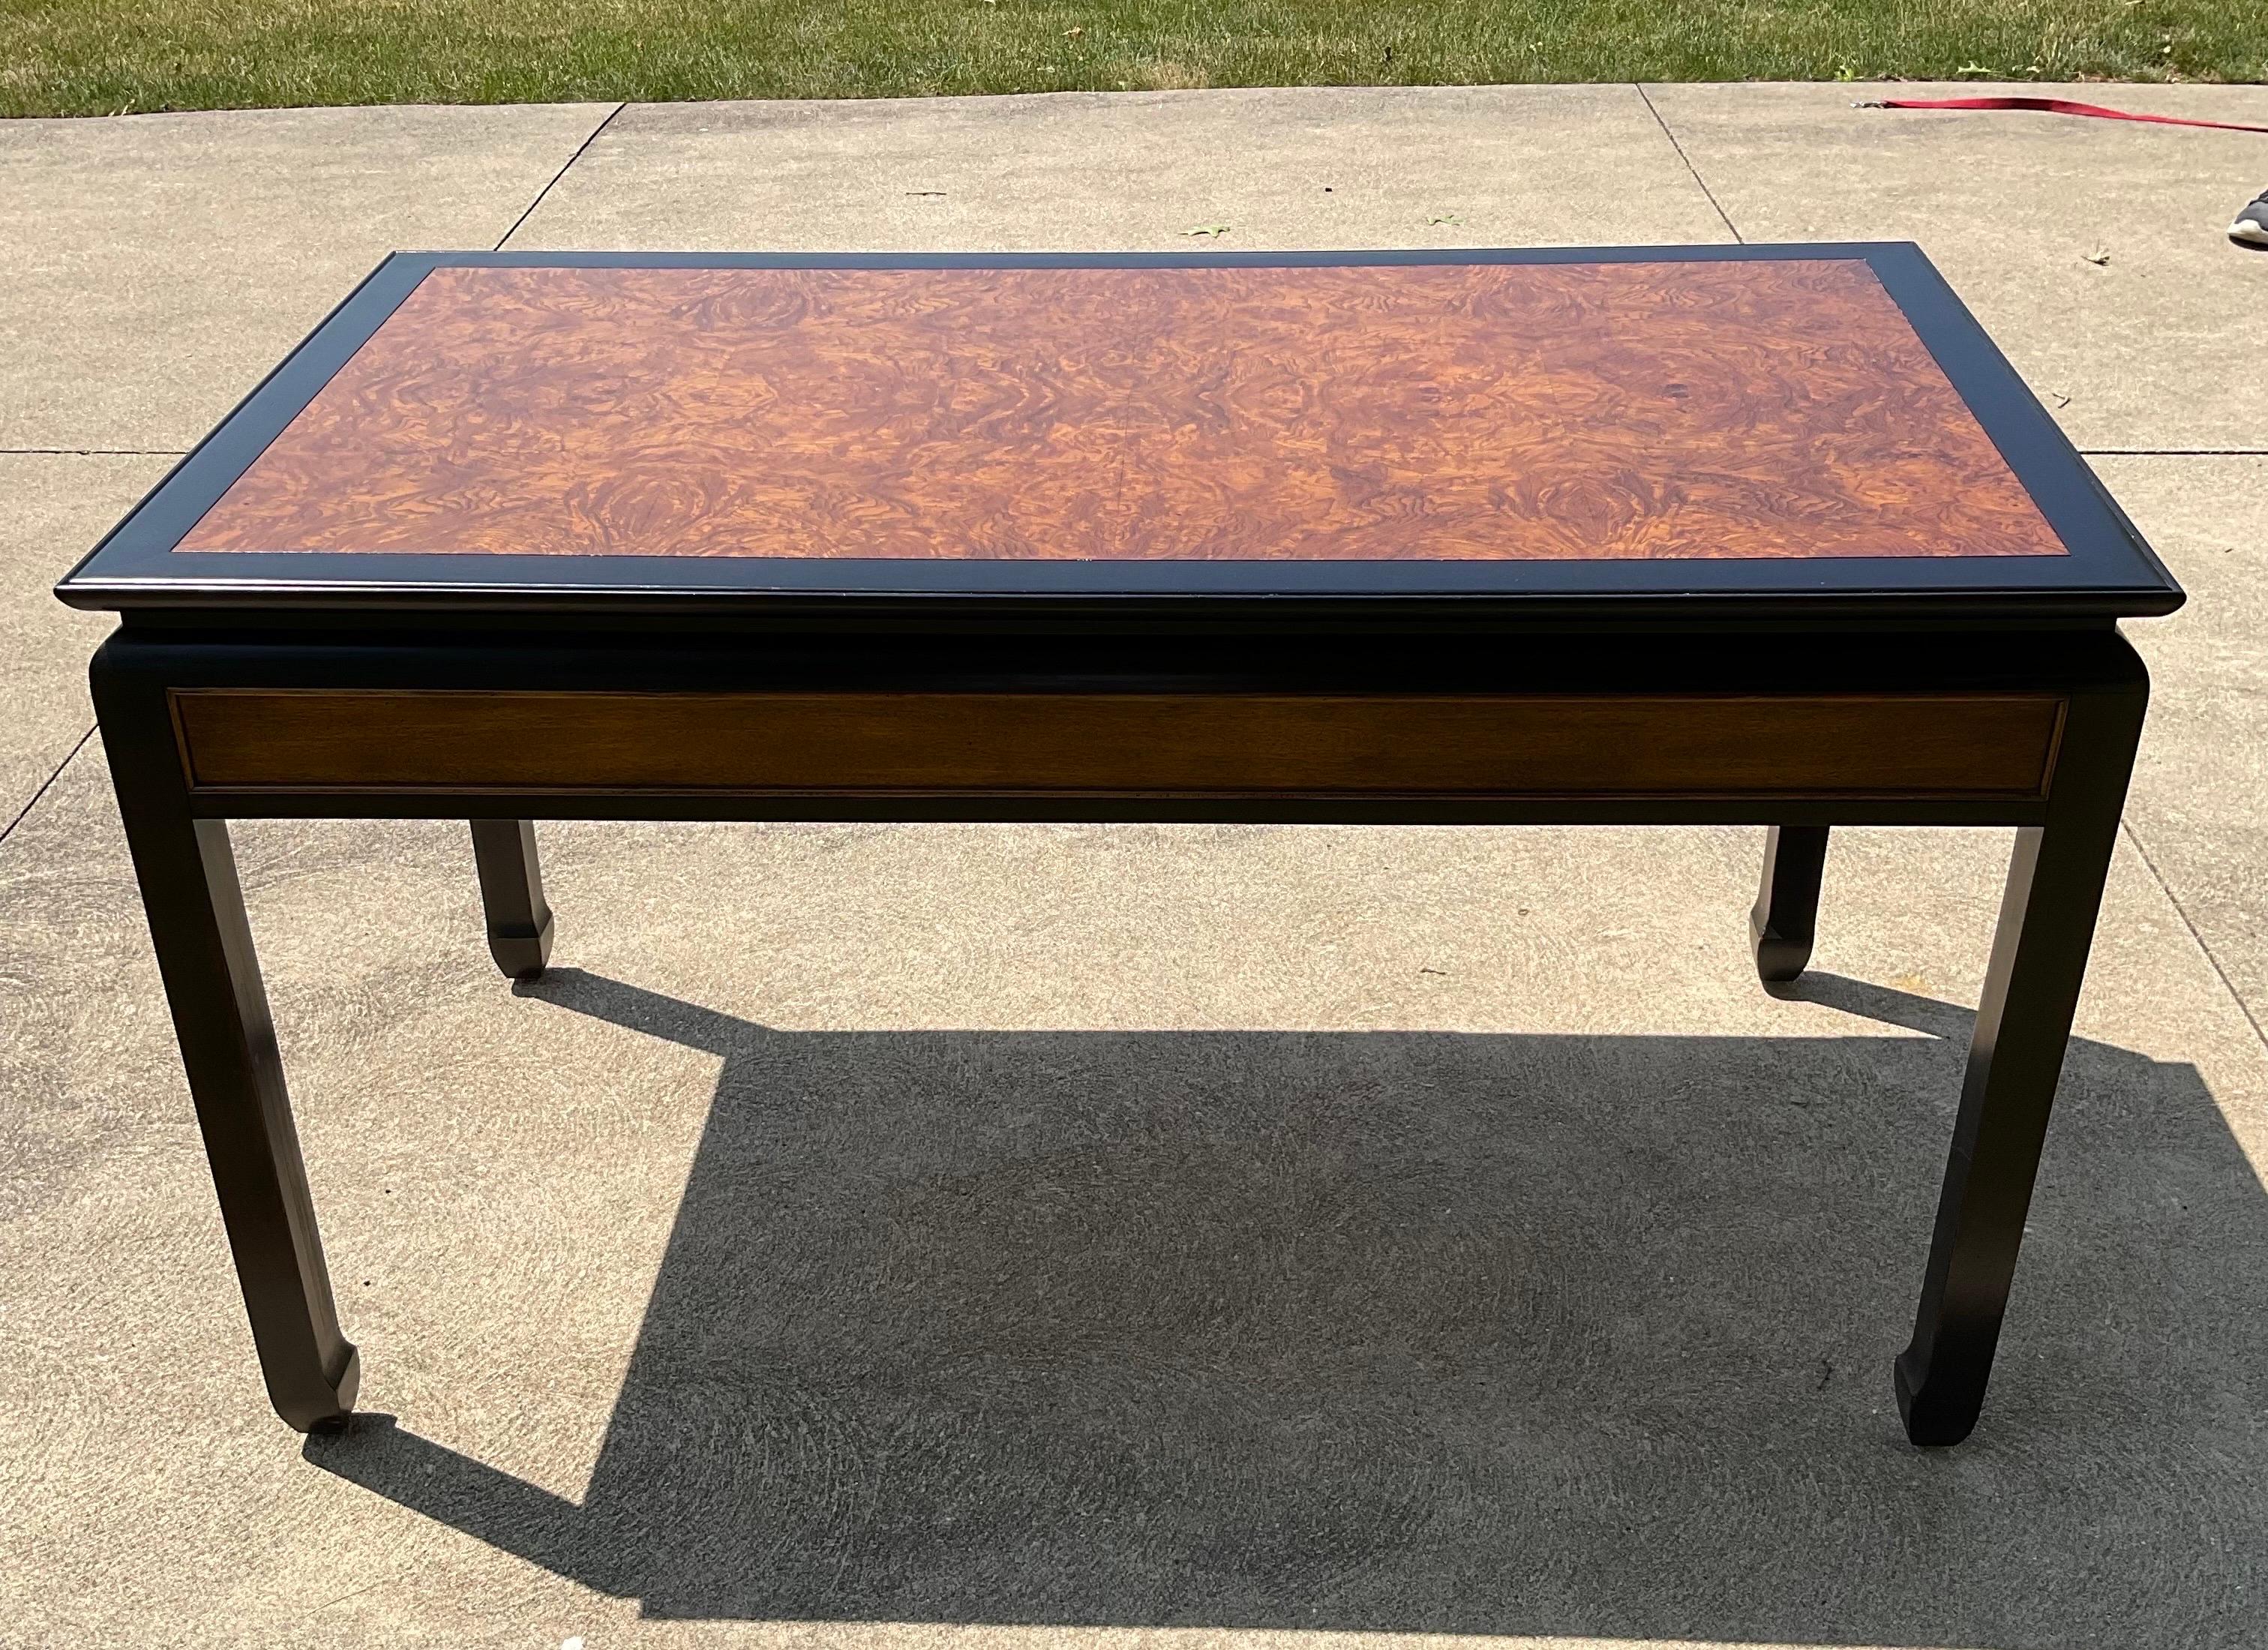 1970s Writing Desk From Century Furniture’s Chin Hua Collection by Raymond Sobot 1